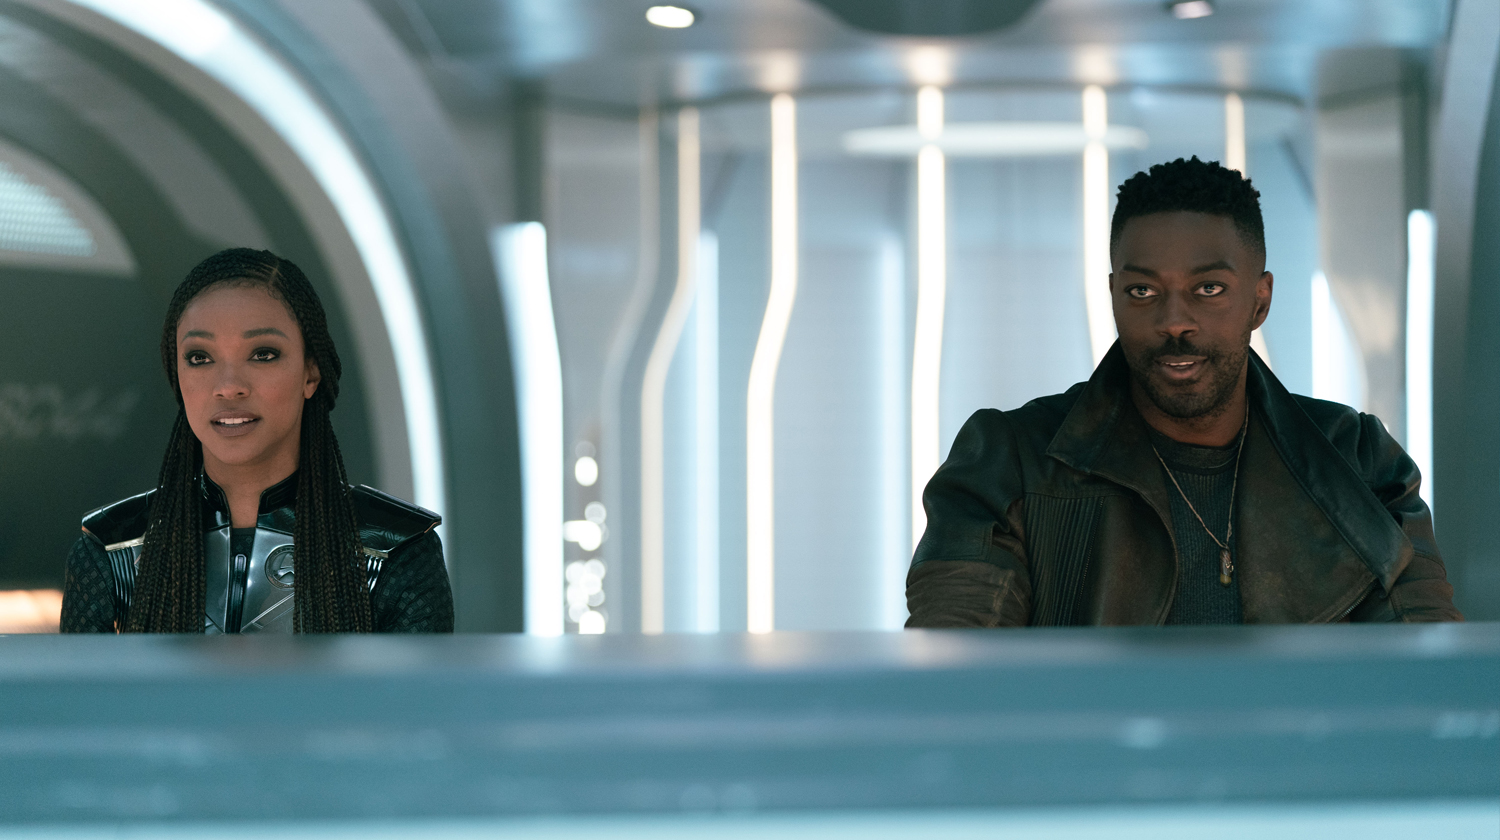 'star trek: discovery' s05, e05 is a quality installment, but it's weighed down by another anchor of nostalgia